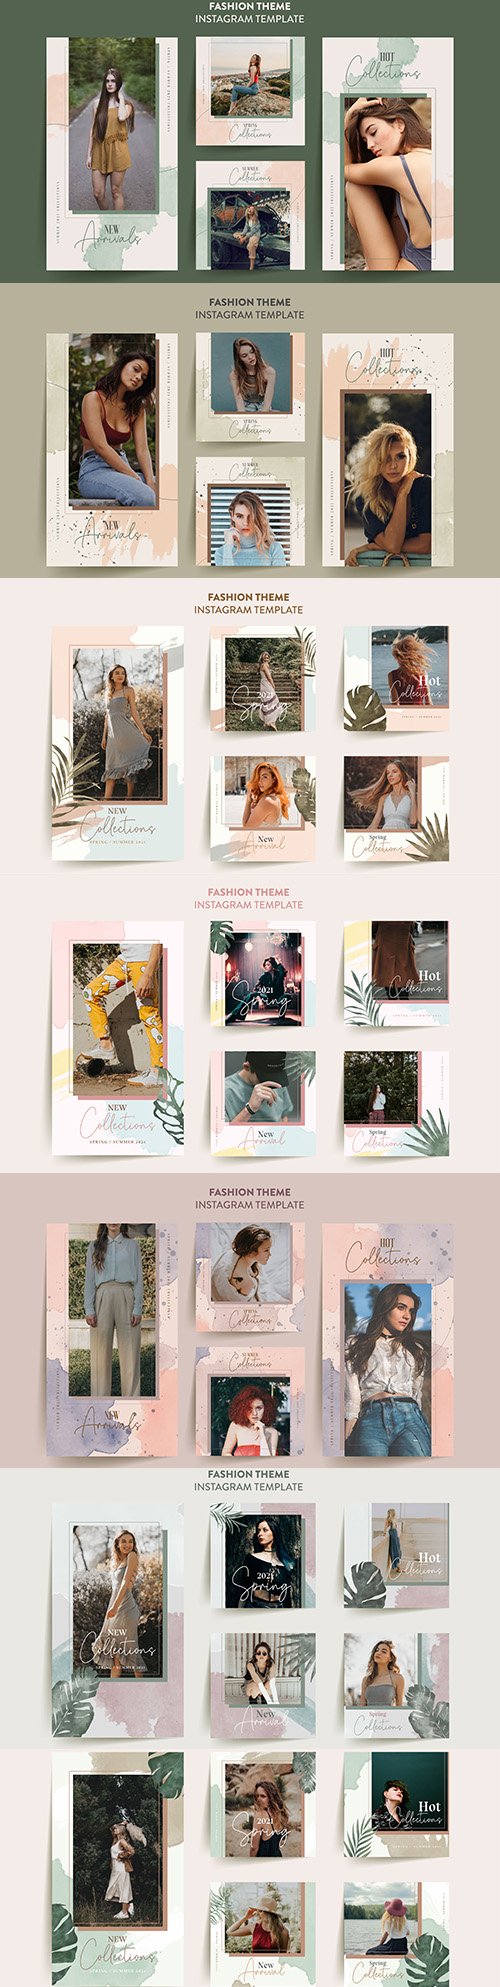 Fashion woman 's instagram story template with tropical leaves